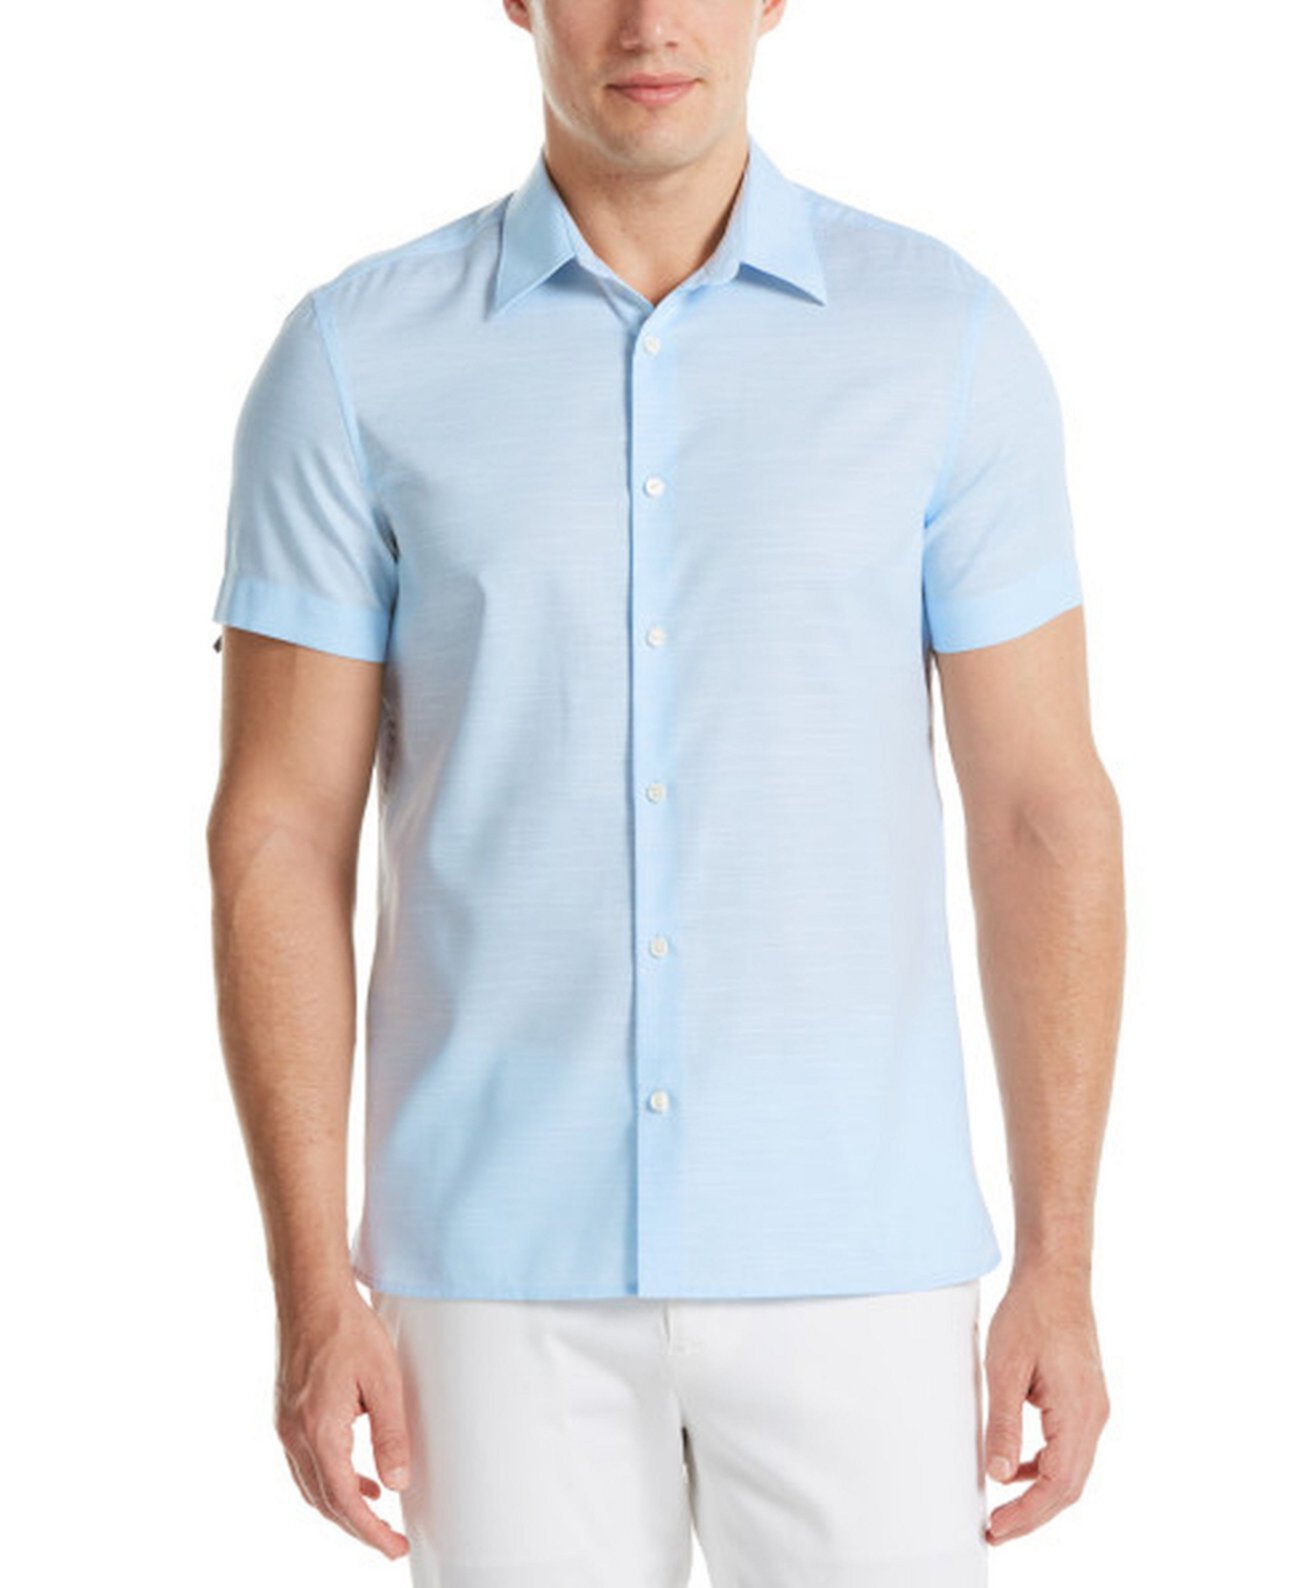 Men's Solid Dobby Texture Short Sleeve Button-Down Shirt Perry Ellis